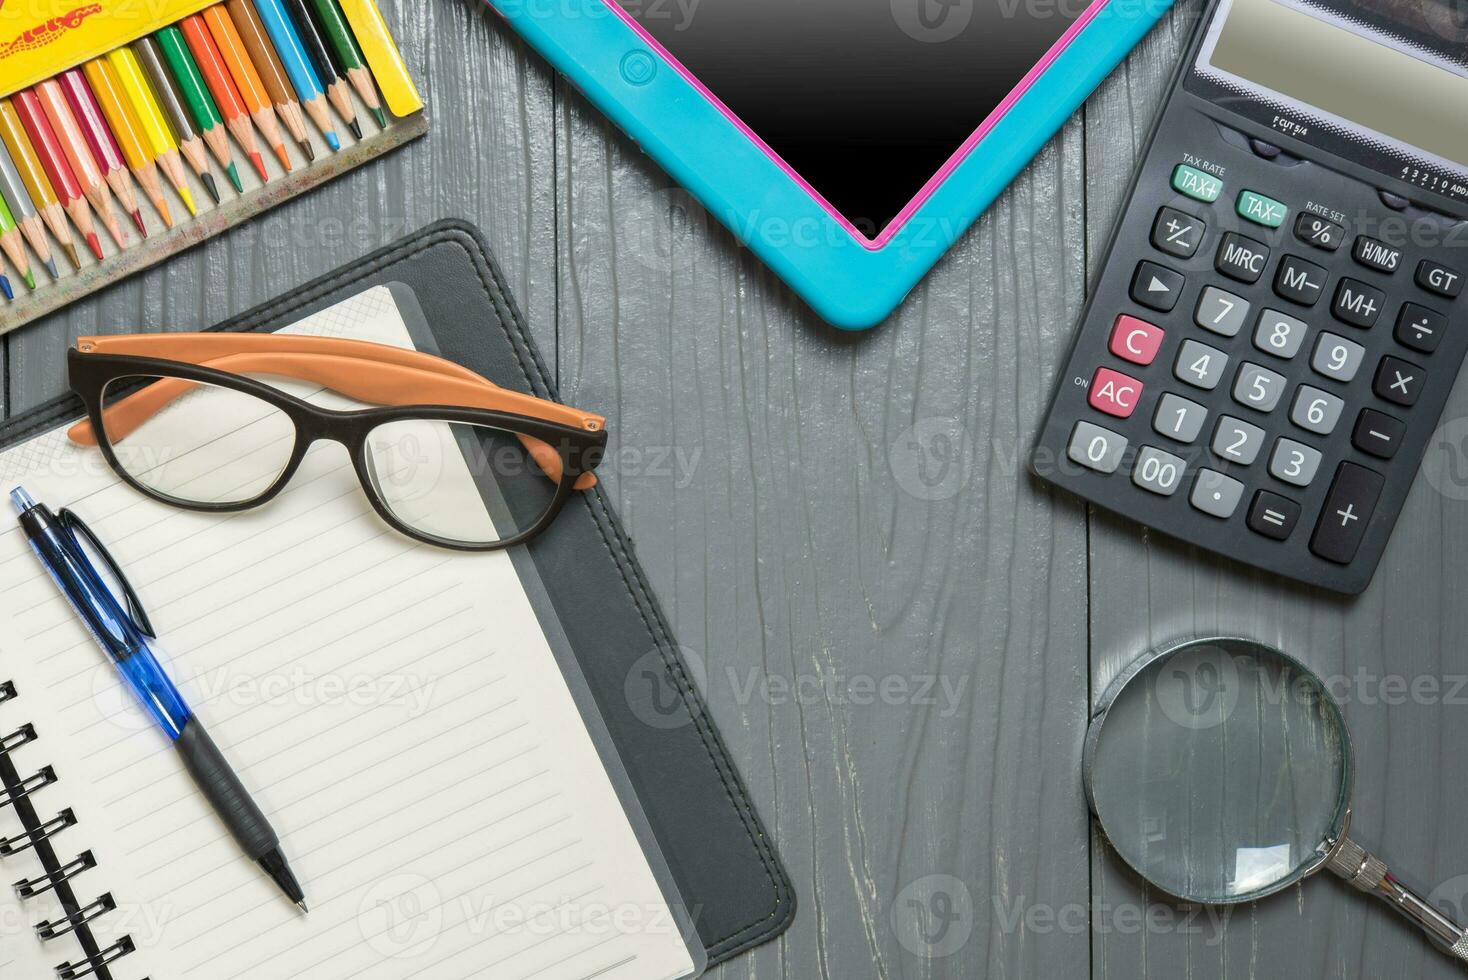 Notebook, pen, color pencil, Magnifier calculator  and tablet pc, on wood table background. Business concept. photo